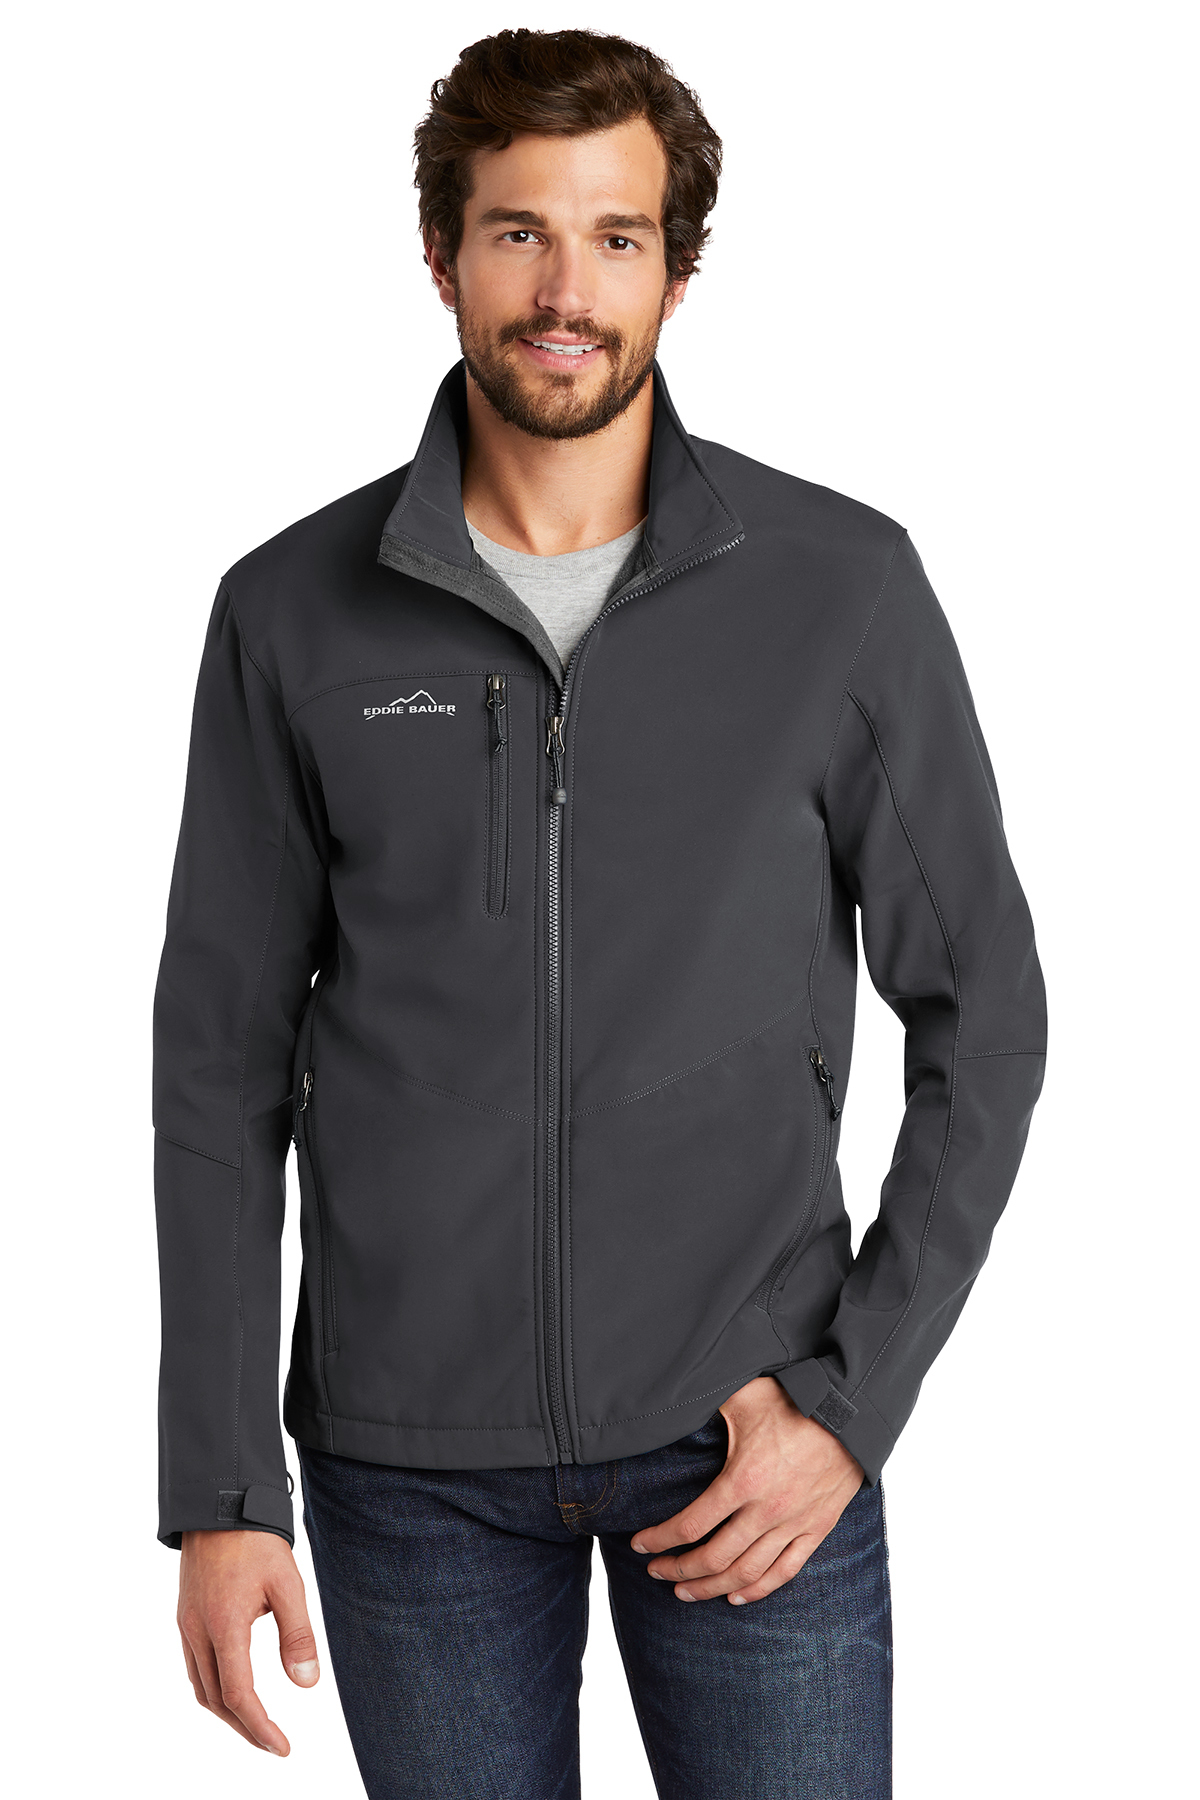 Eddie Bauer - Soft Shell Jacket | Product | Company Casuals